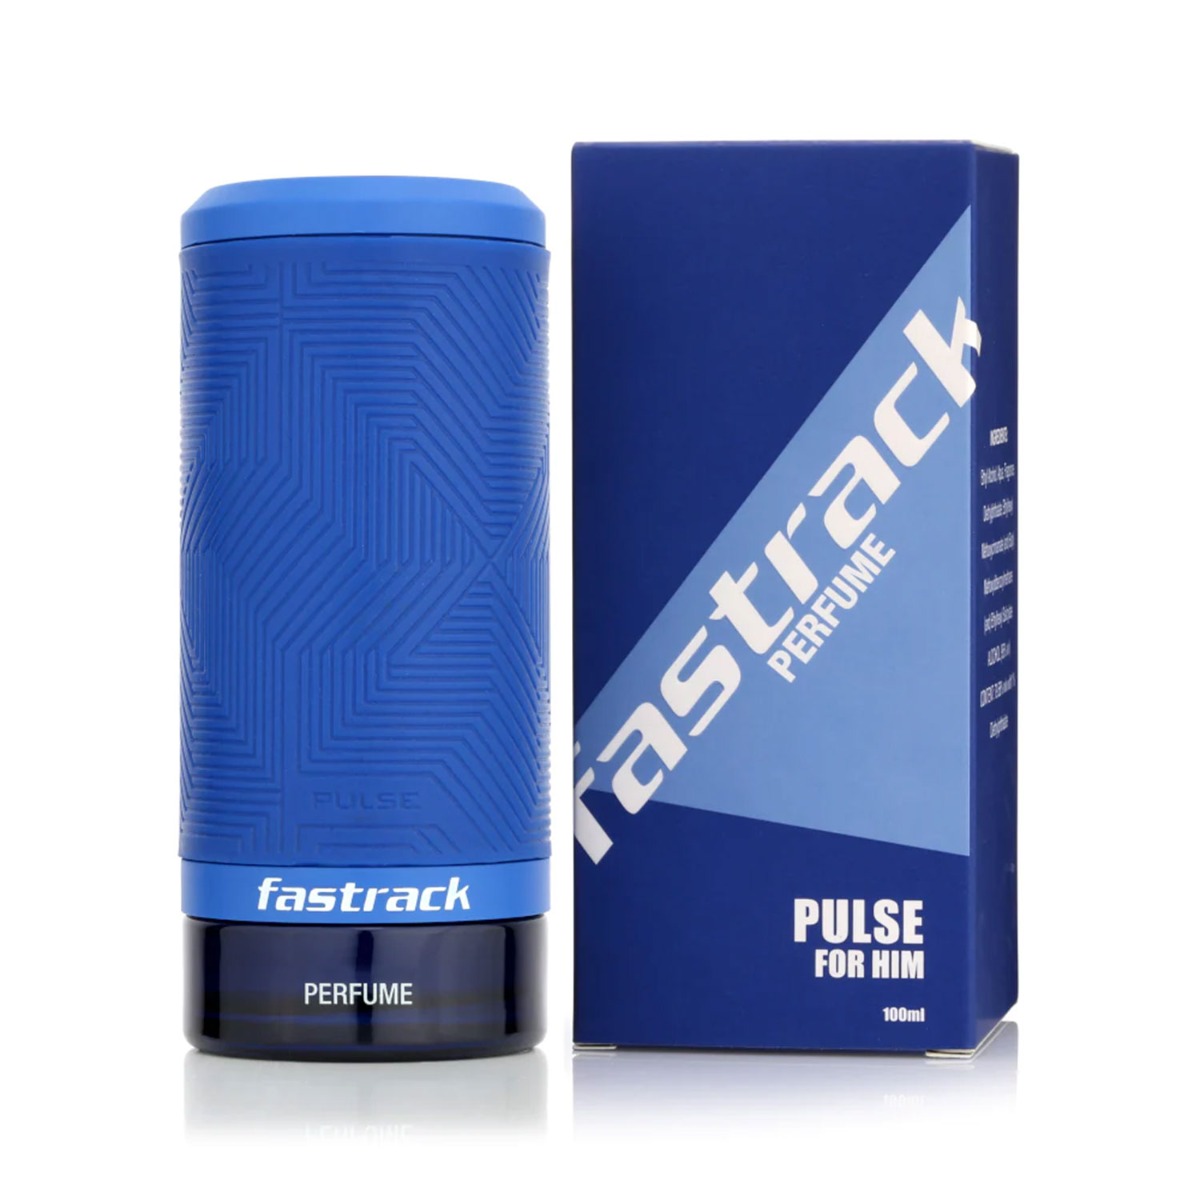 Fastrack Perfume Pulse For Him, 100ml